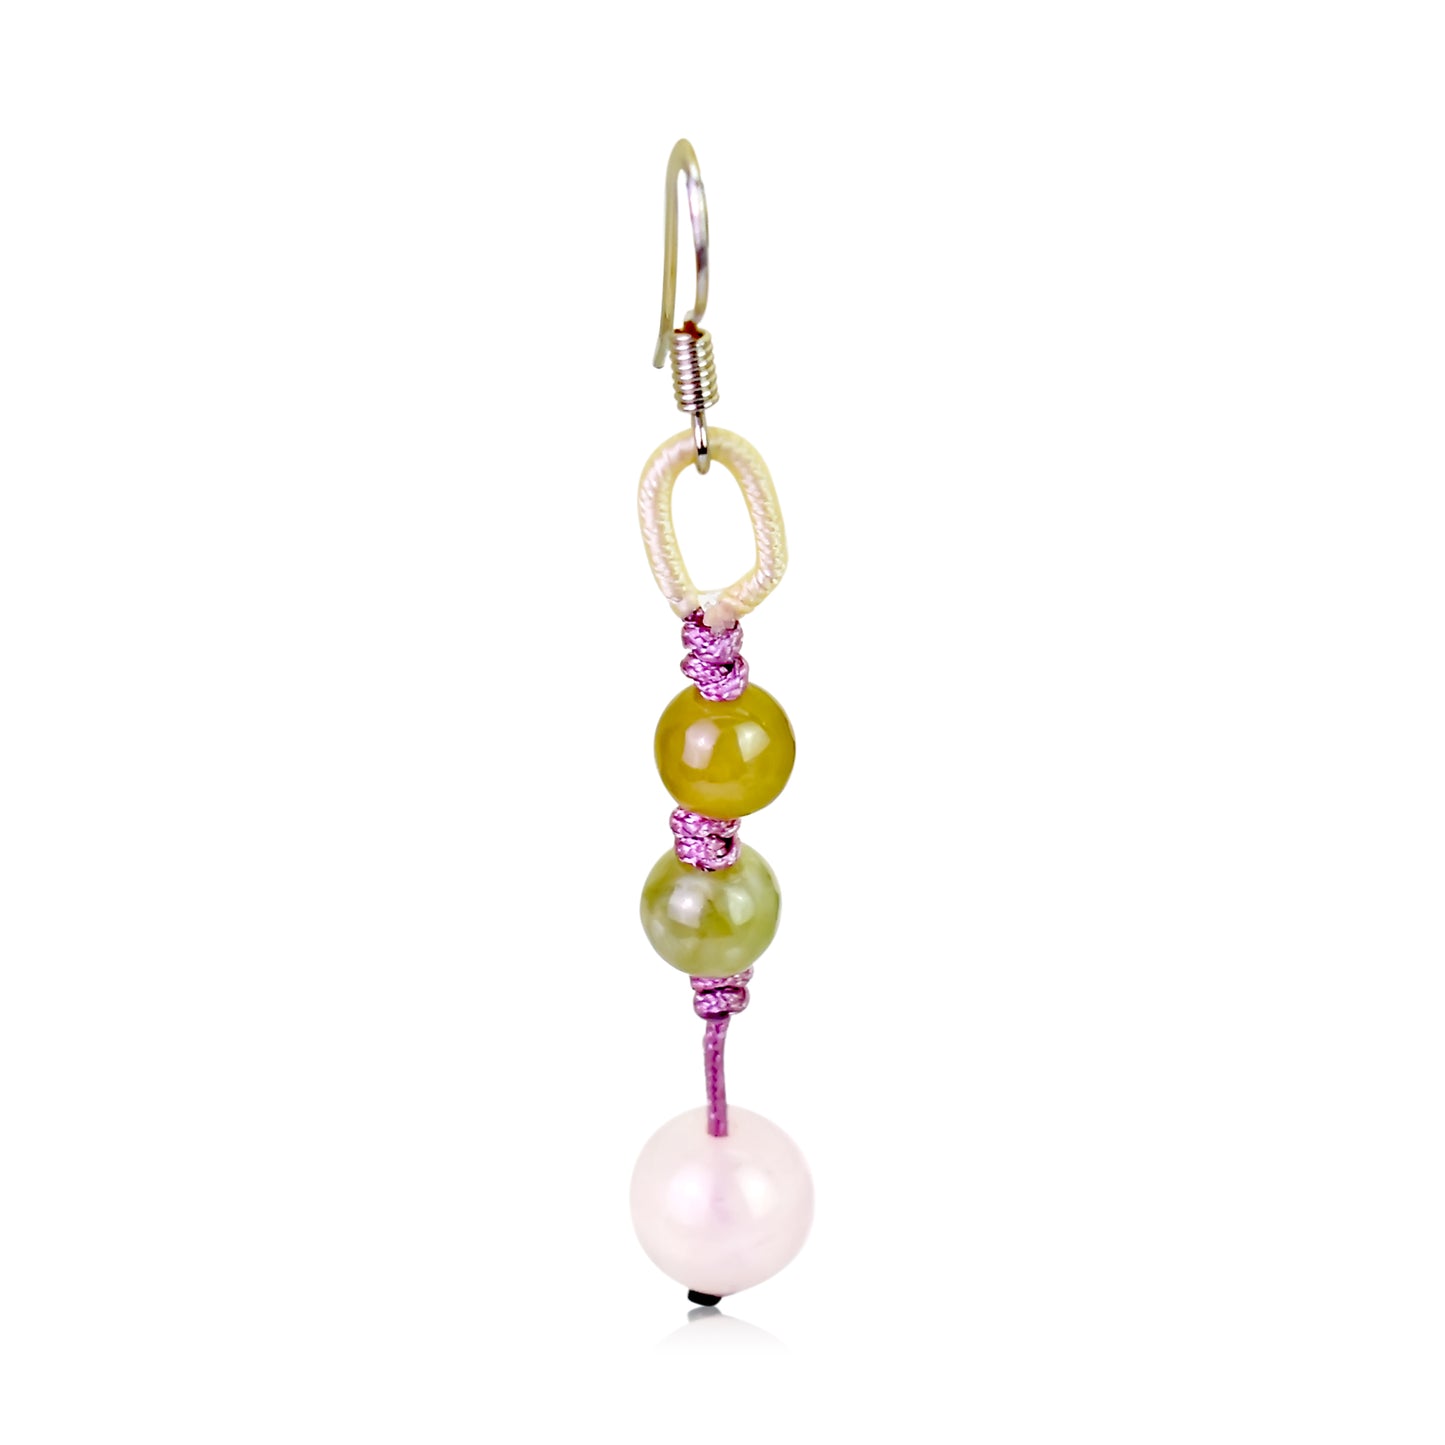 Add a Little Color to Your Look with Playful Beads Rose Quartz Earrings made with Lavender Cord